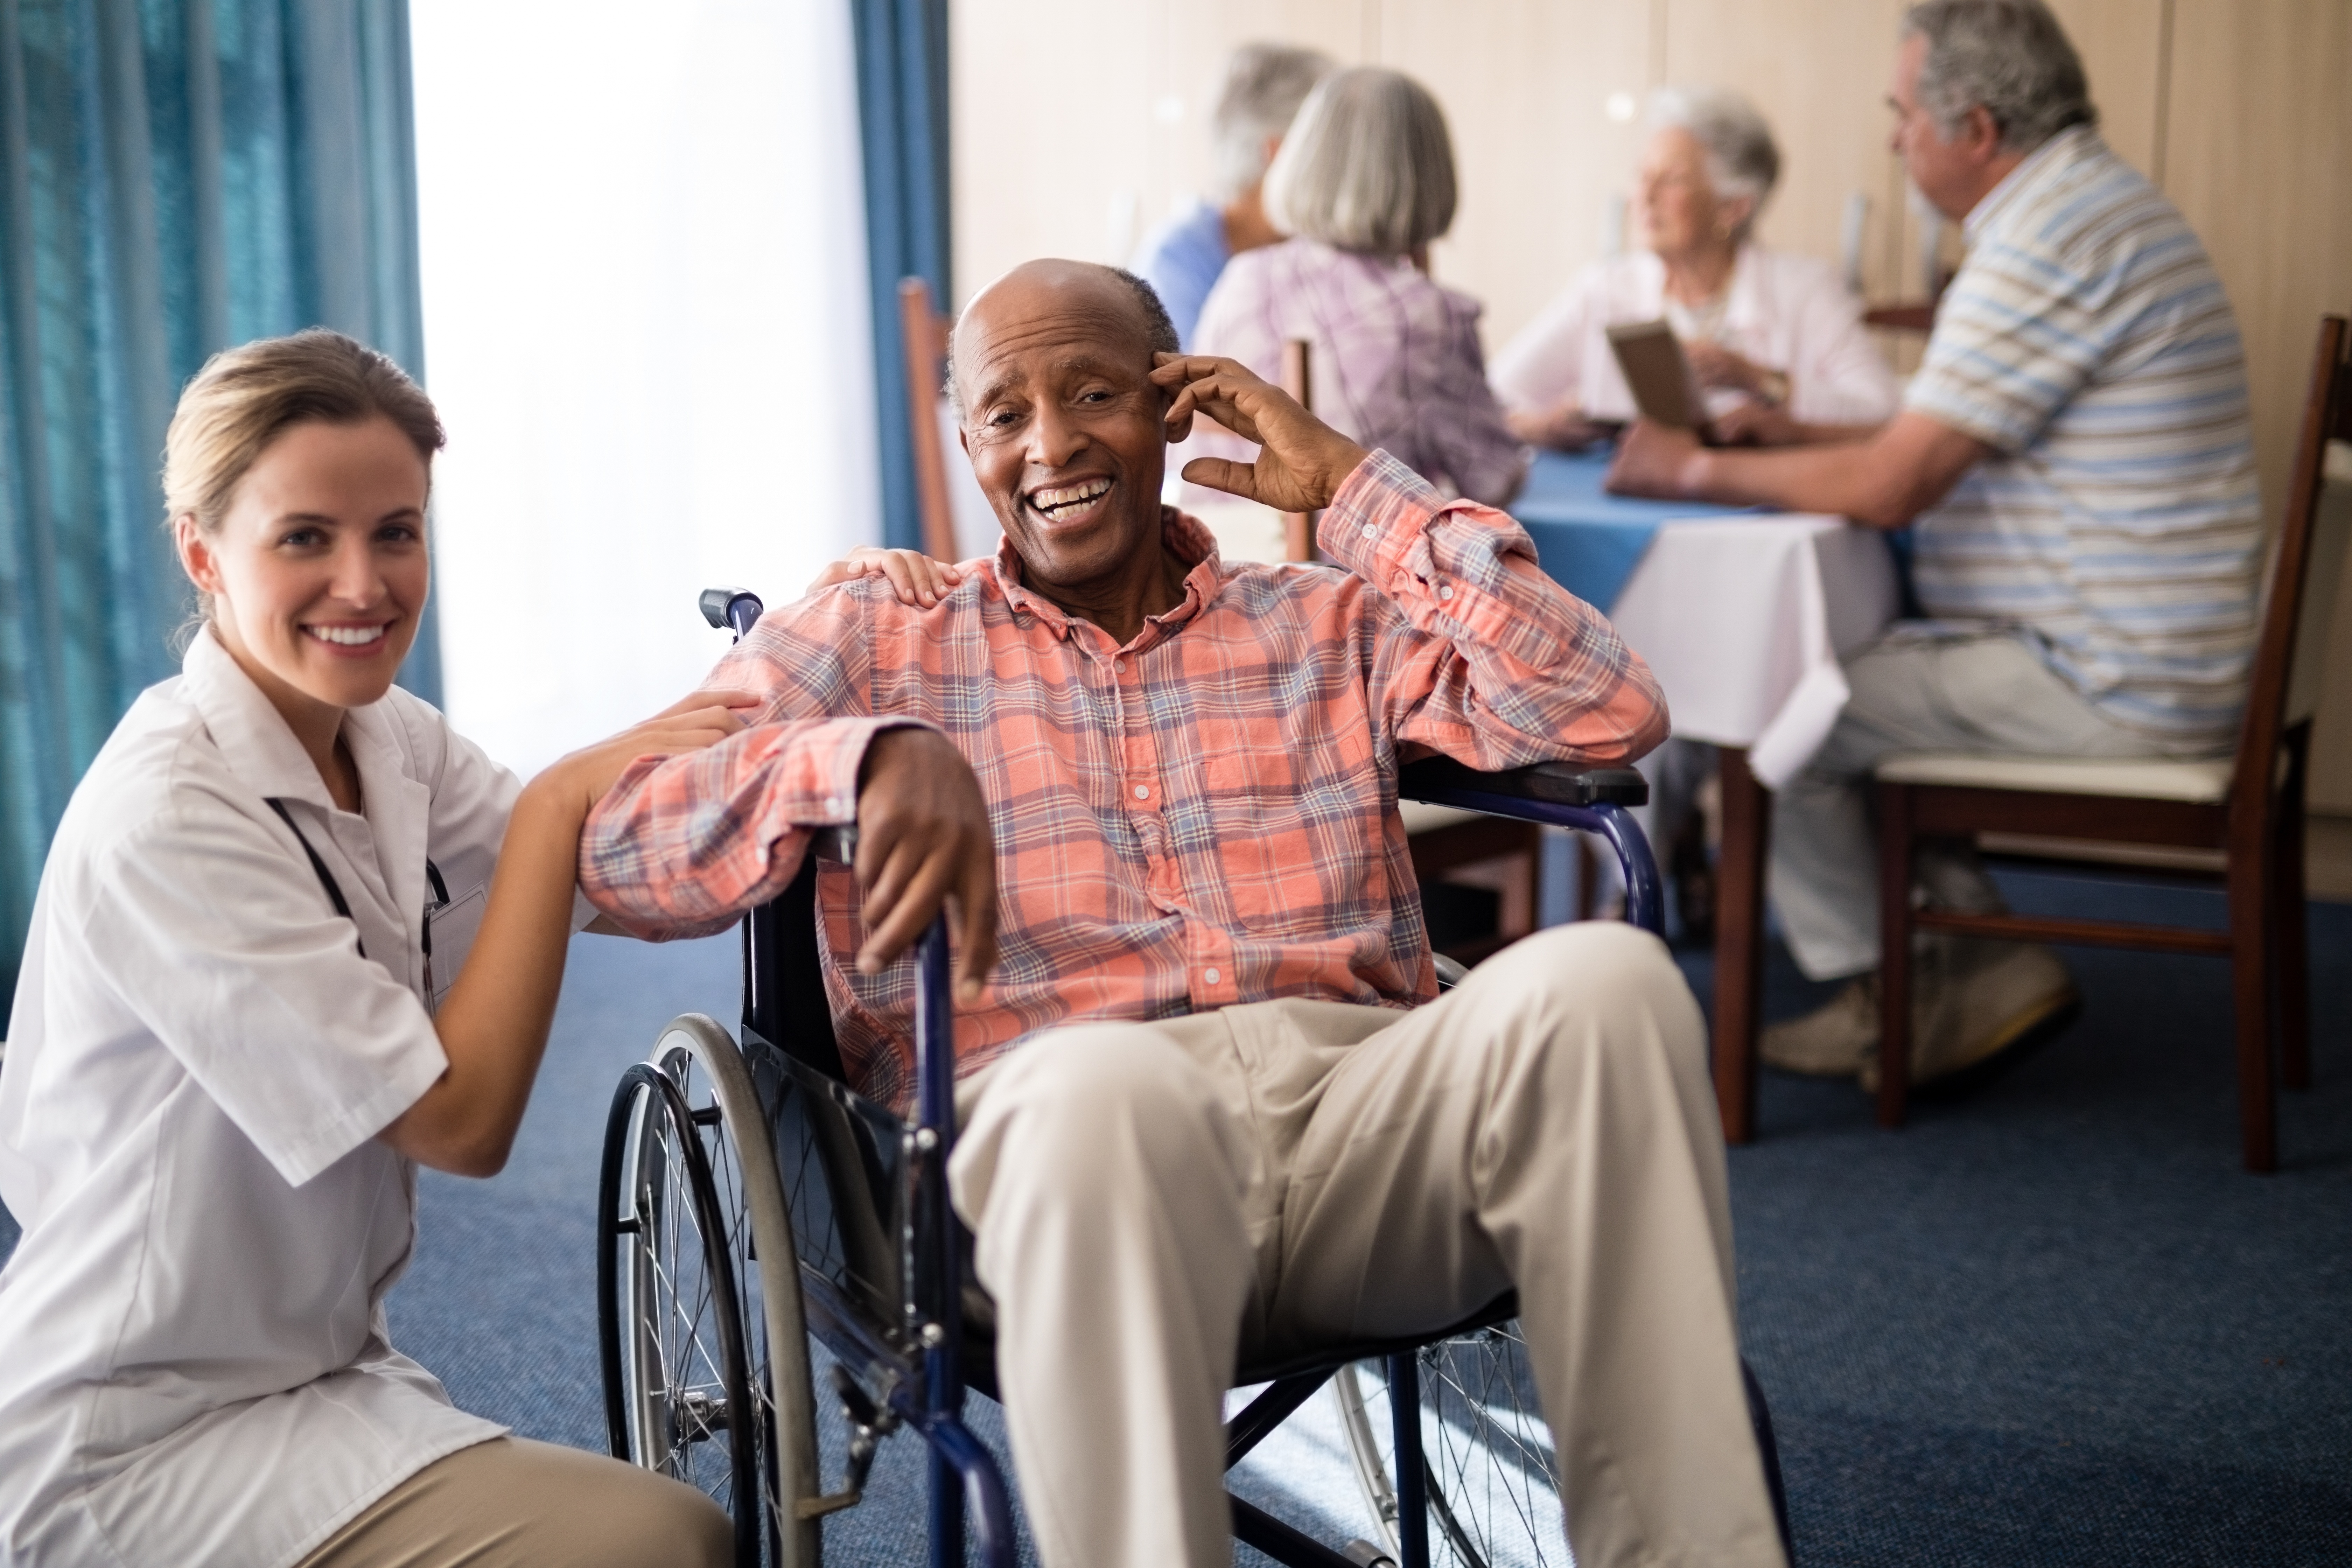 Image of an older man smiling while sitting in a wheelchair while a nurse kneels down beside him and smiles toward the viewer.